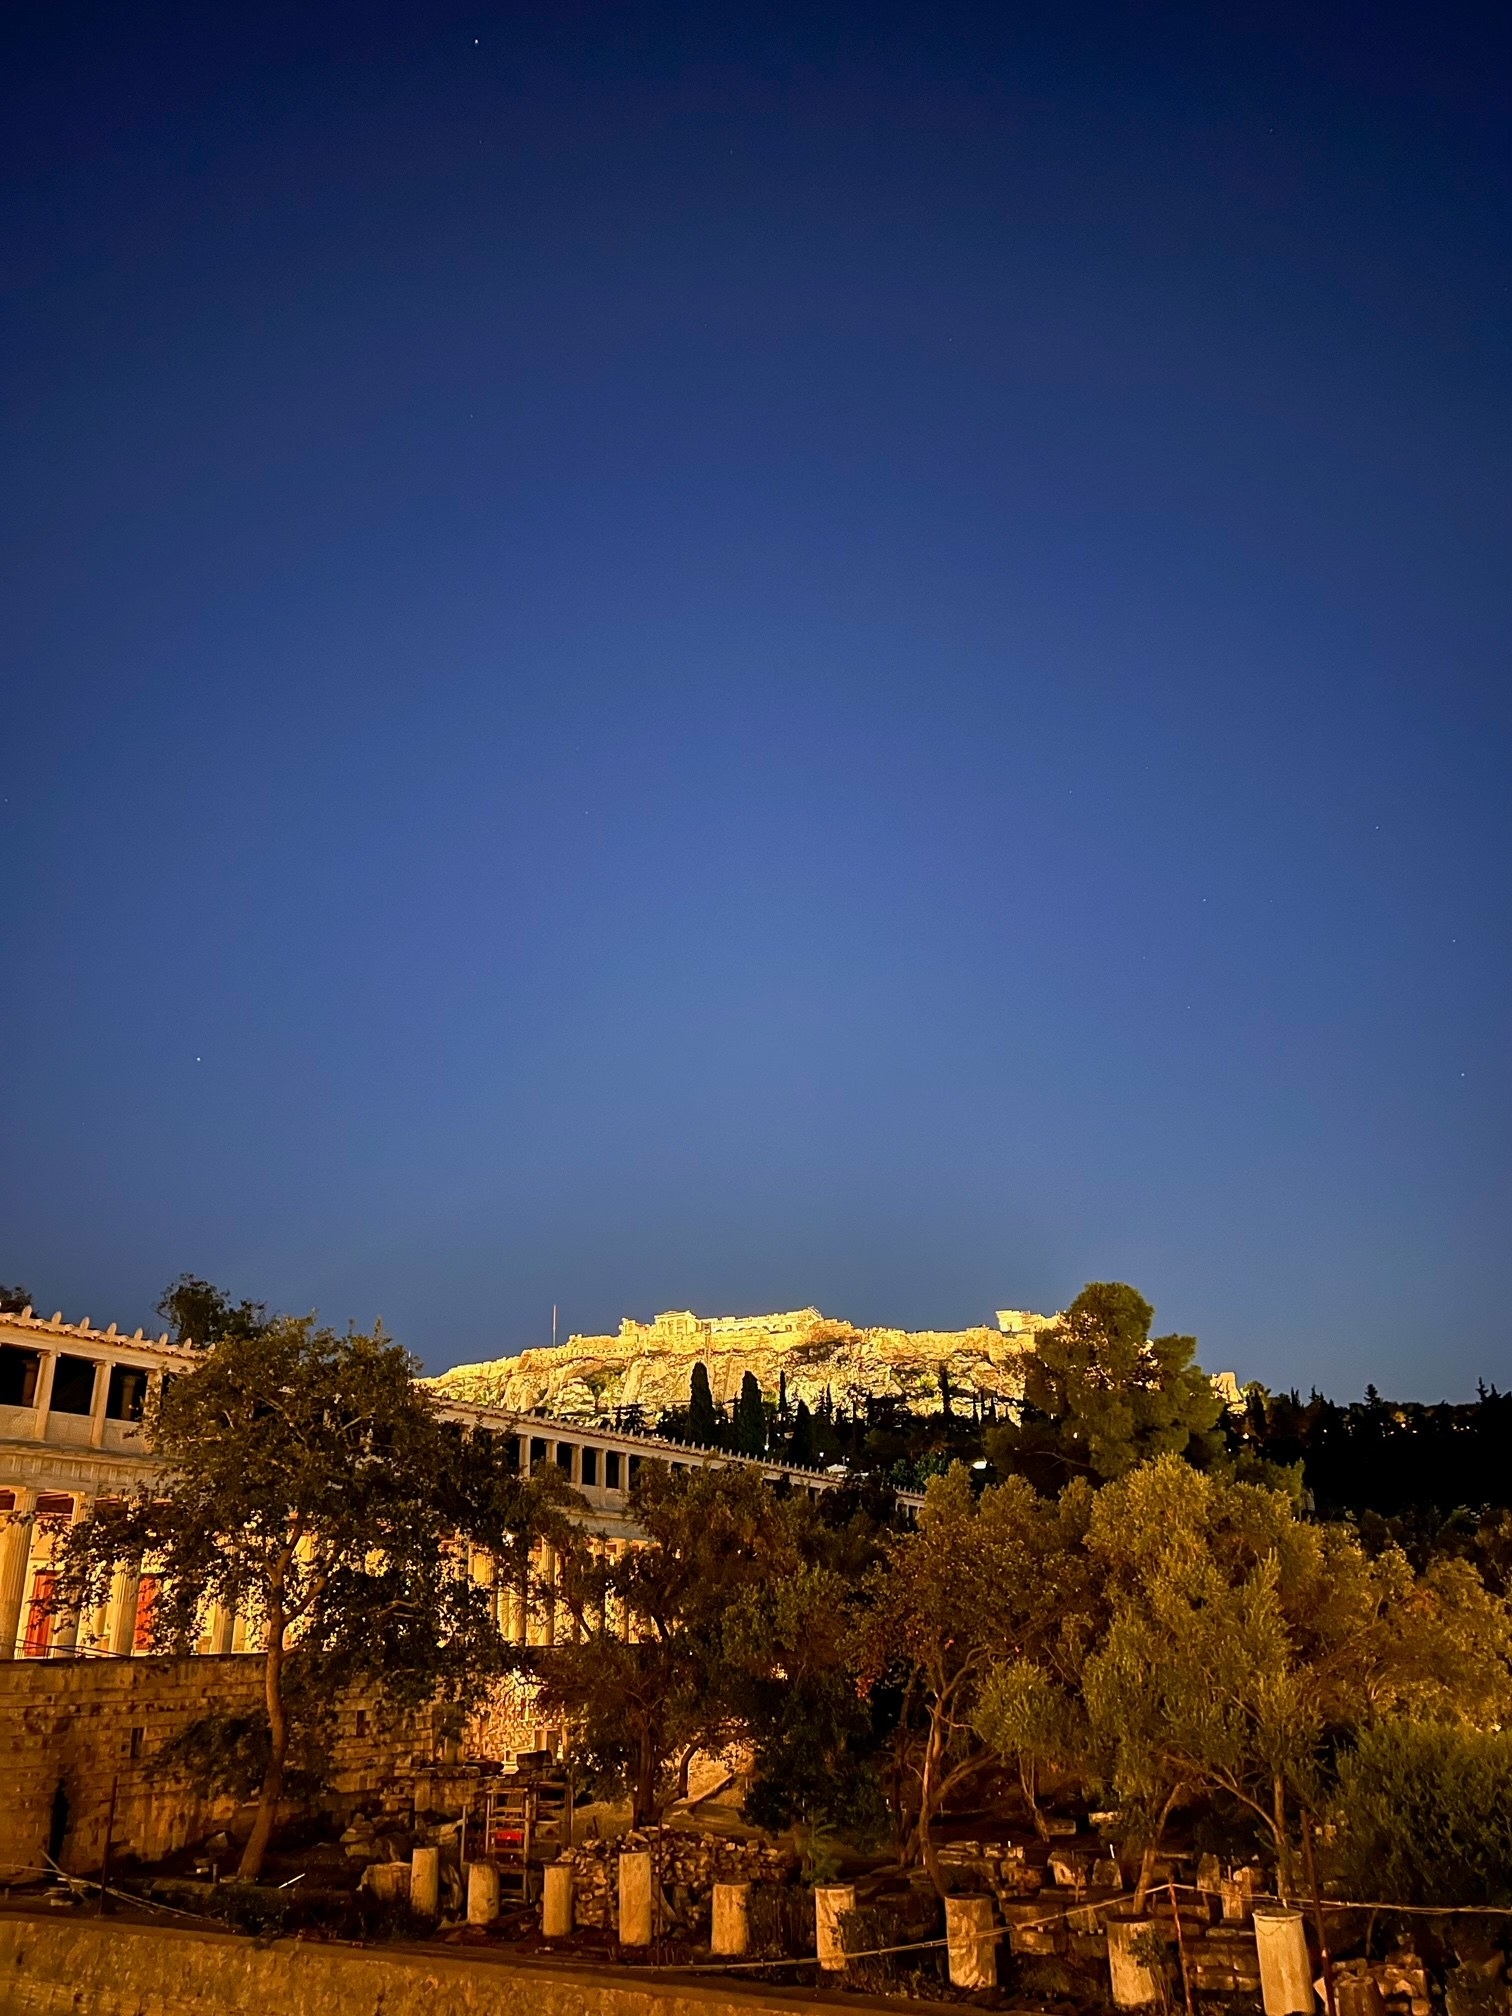 The Acropolis lit up at night.